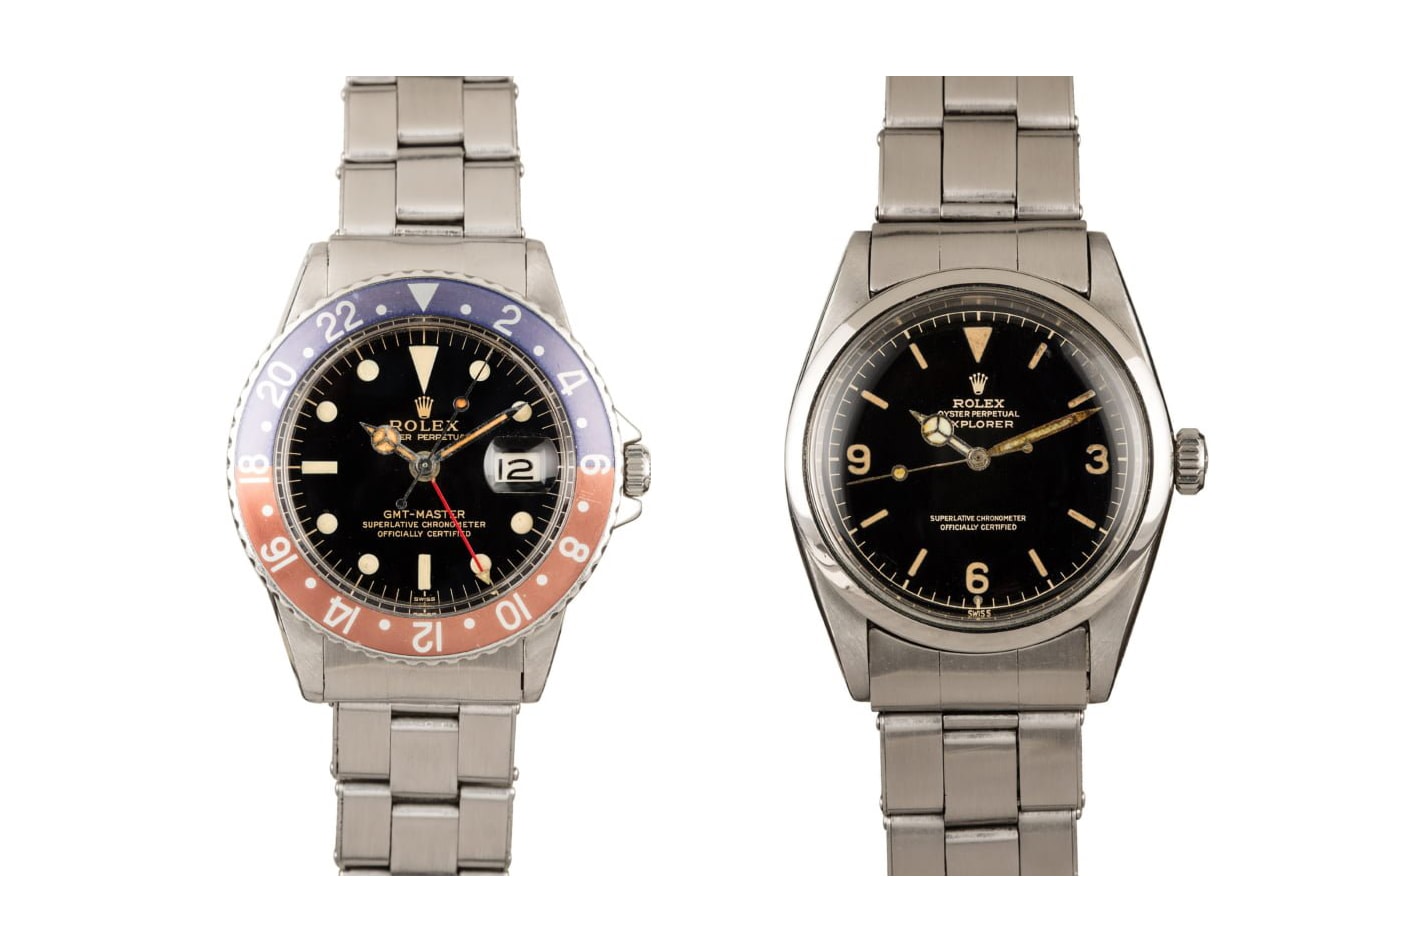 Bob's Watches "FRESH FINDS" Auction Sees '60s-Era Vintage Watches Rolex Omega 